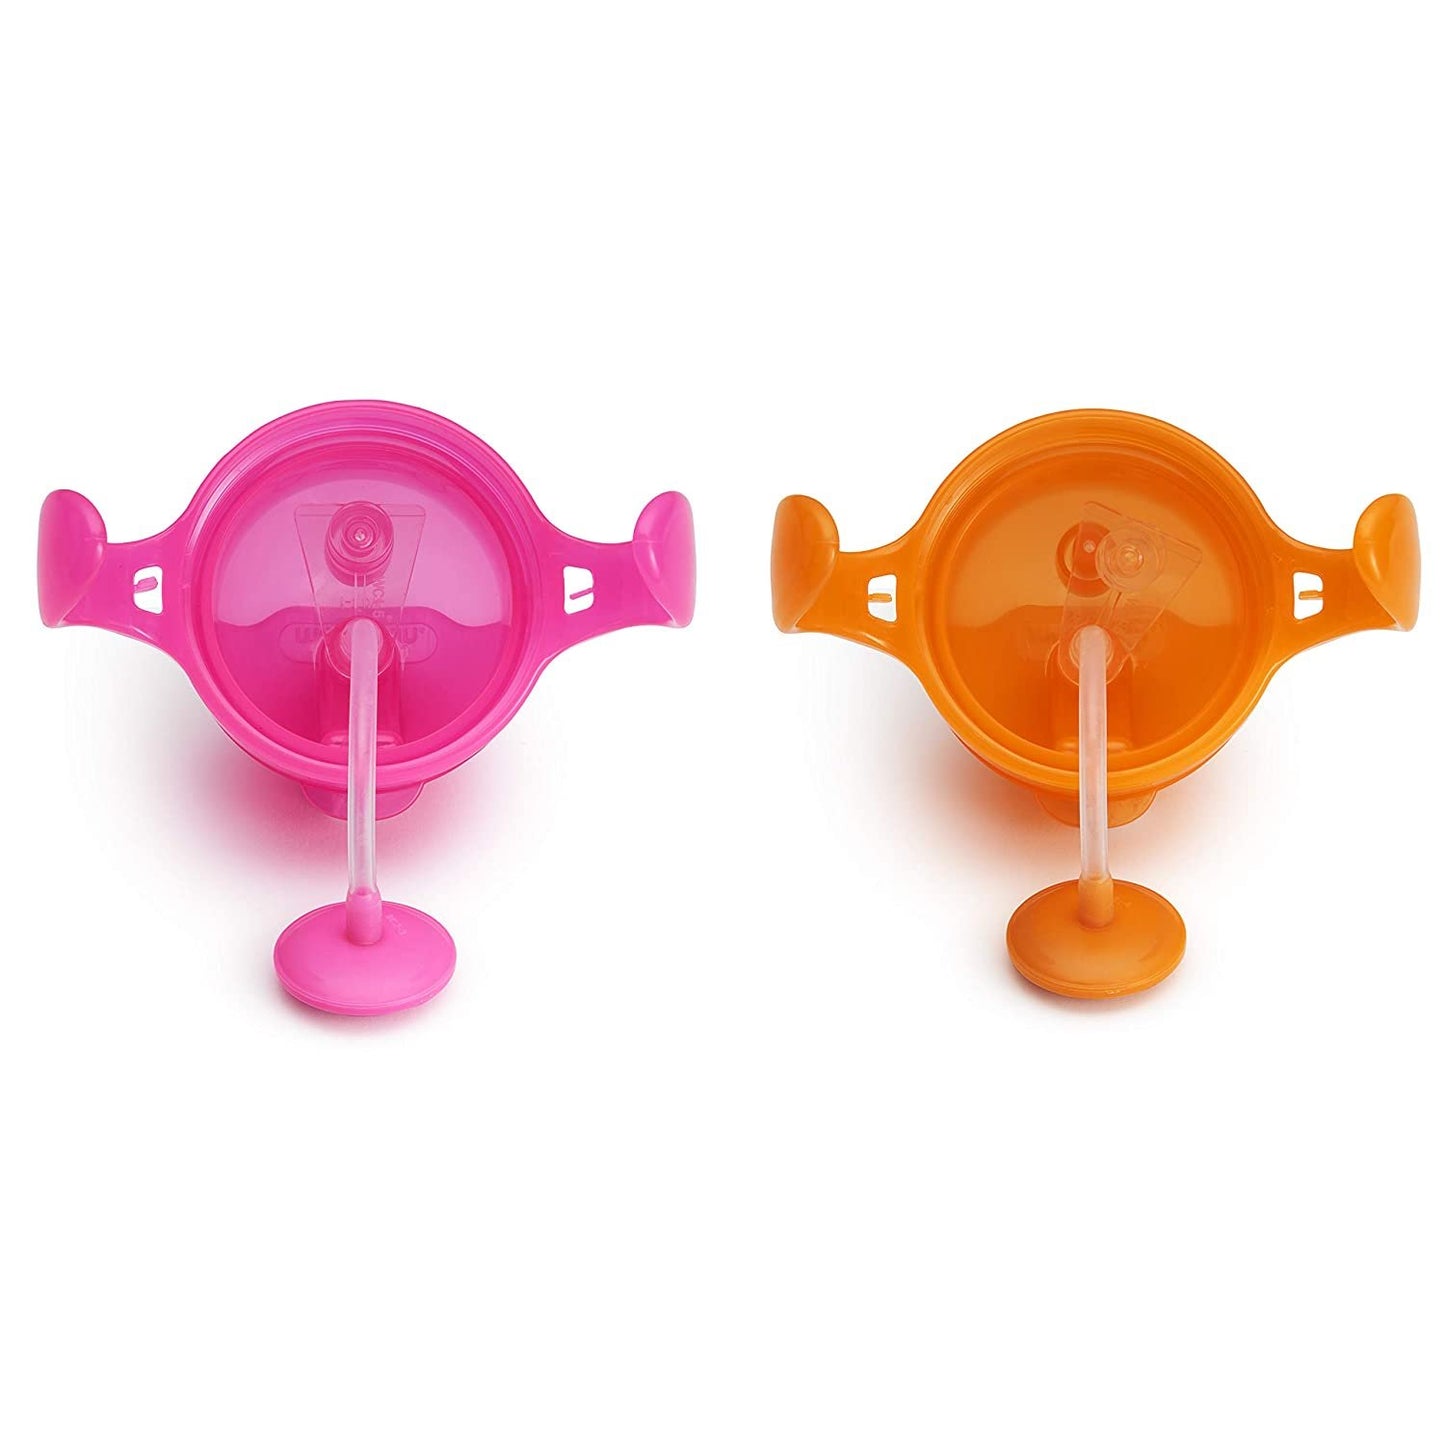 Munchkin Any Angle Click Lock Weighted Straw Trainer Cup, 7 Ounce, Pink/Orange, 2 Pack